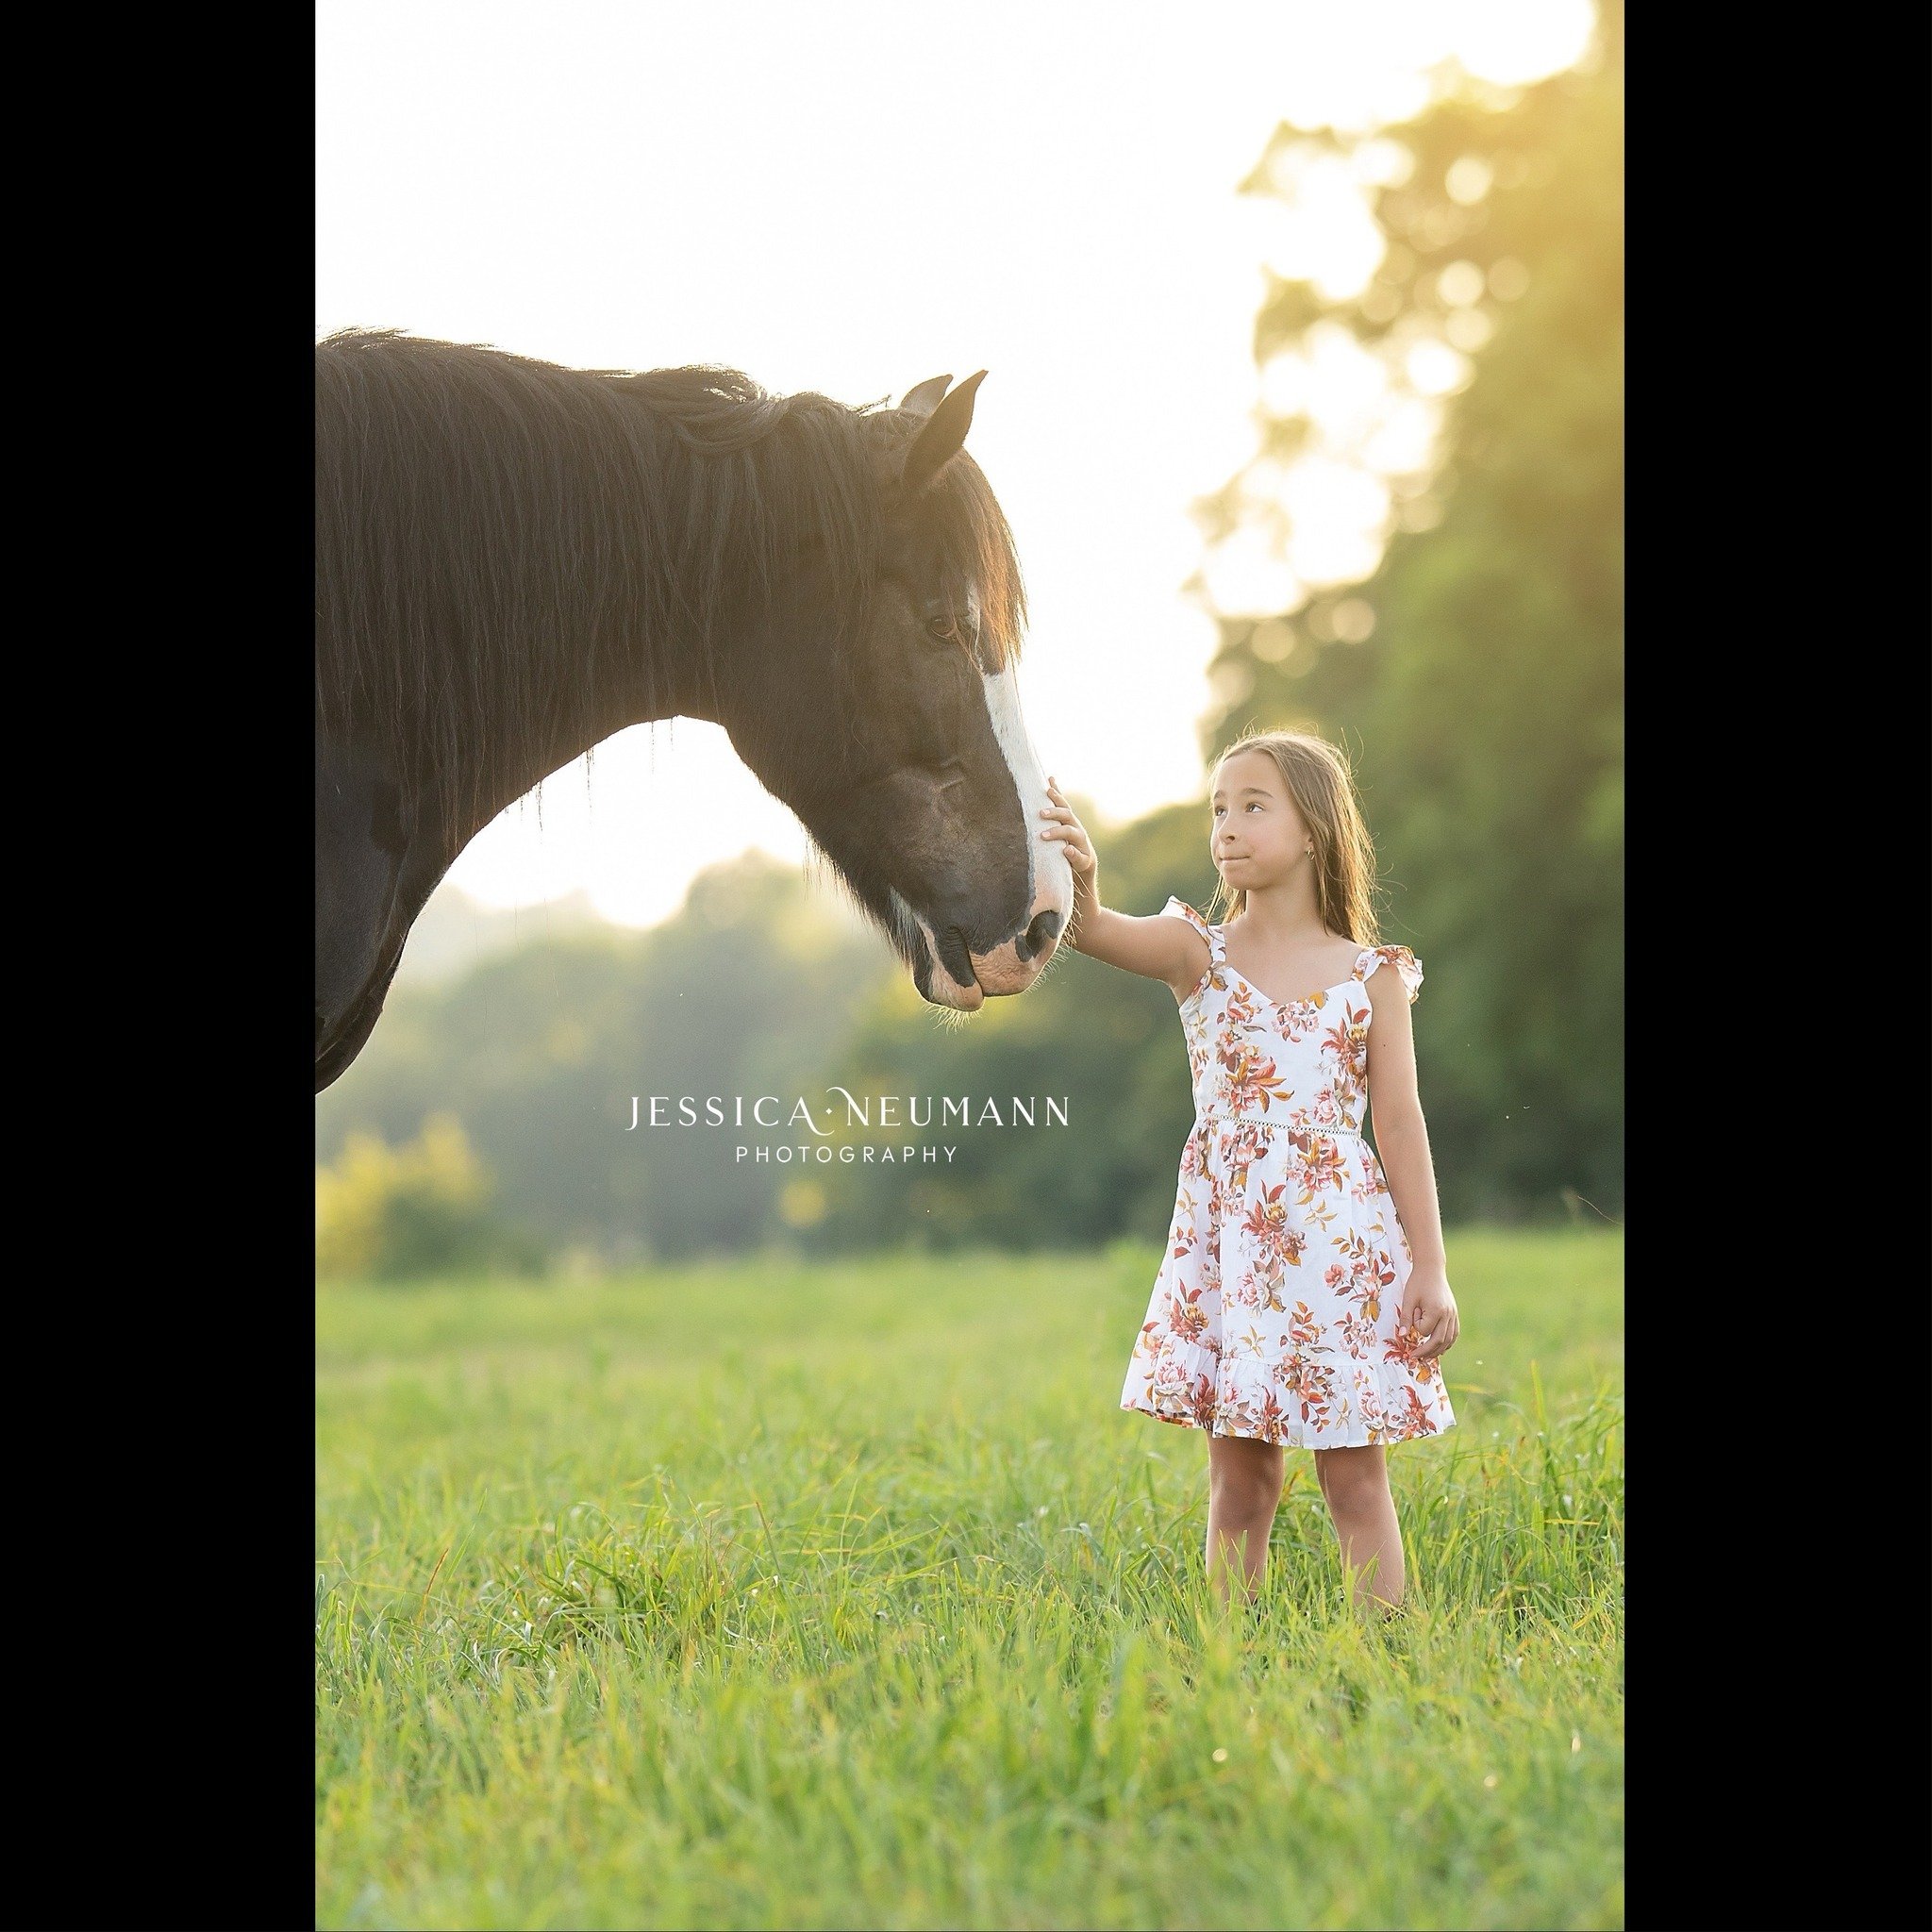 Throwback to this breathtaking session @gentlegiantsdraftrescue 🐴 

If you are interested in booking a session, head to my website for more examples of my work; Click the &ldquo;contact&rdquo; tab for booking details: www.jessicaneumannphotography.c